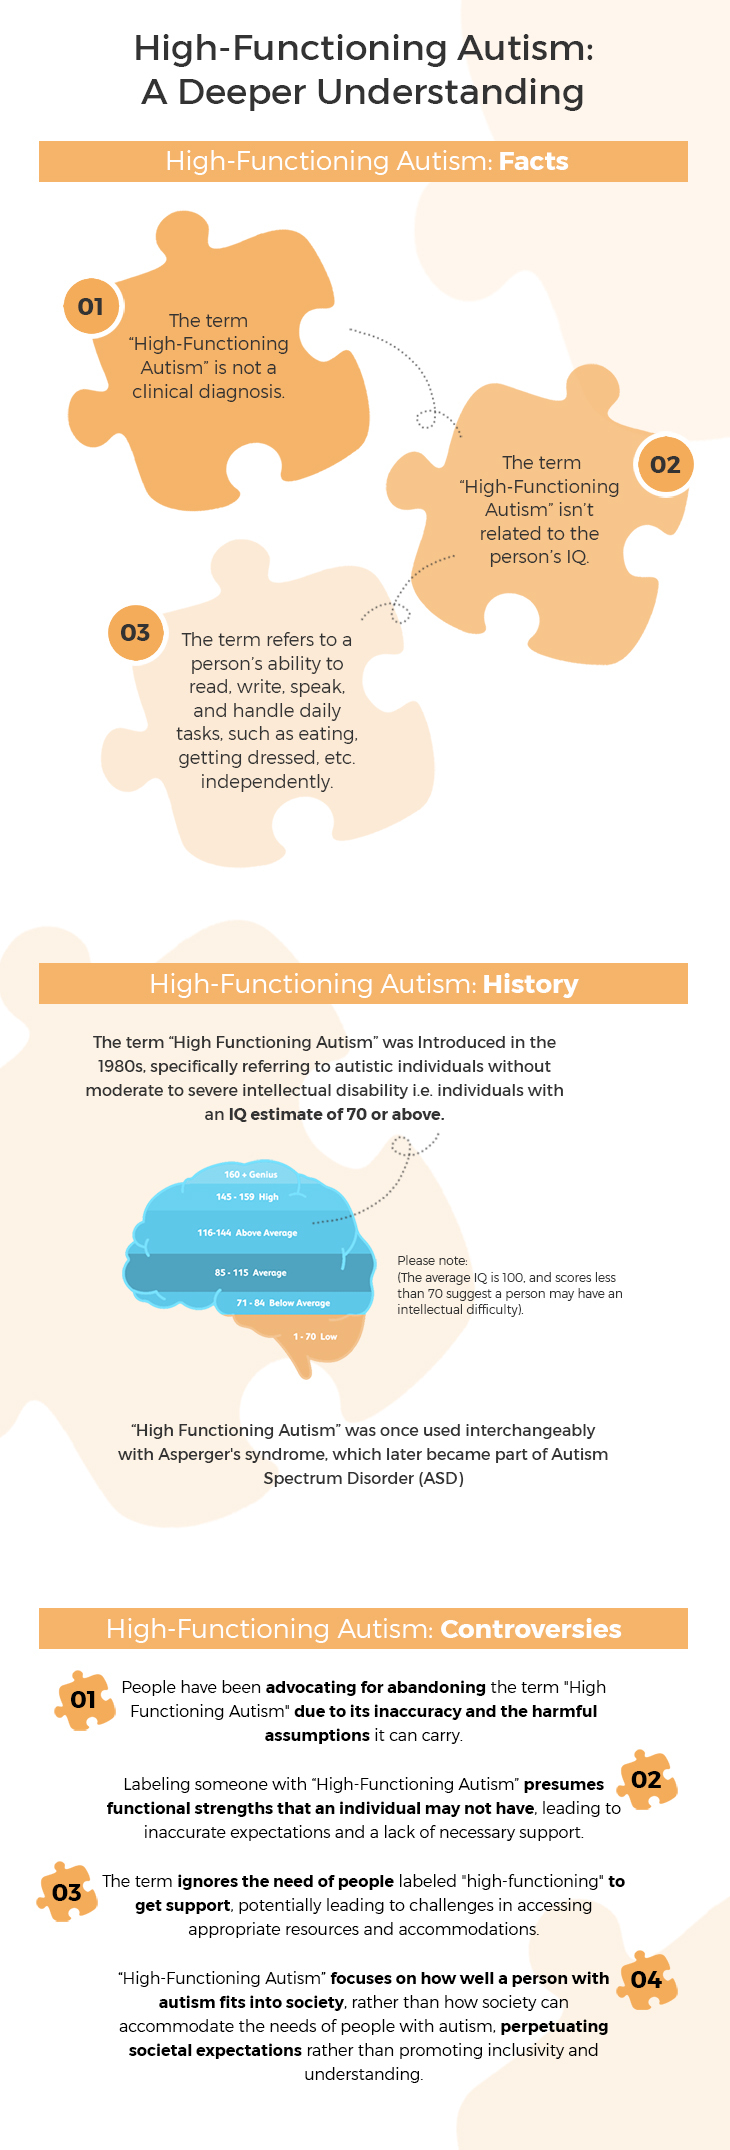 High Functioning Autism Facts, History, and Controversies